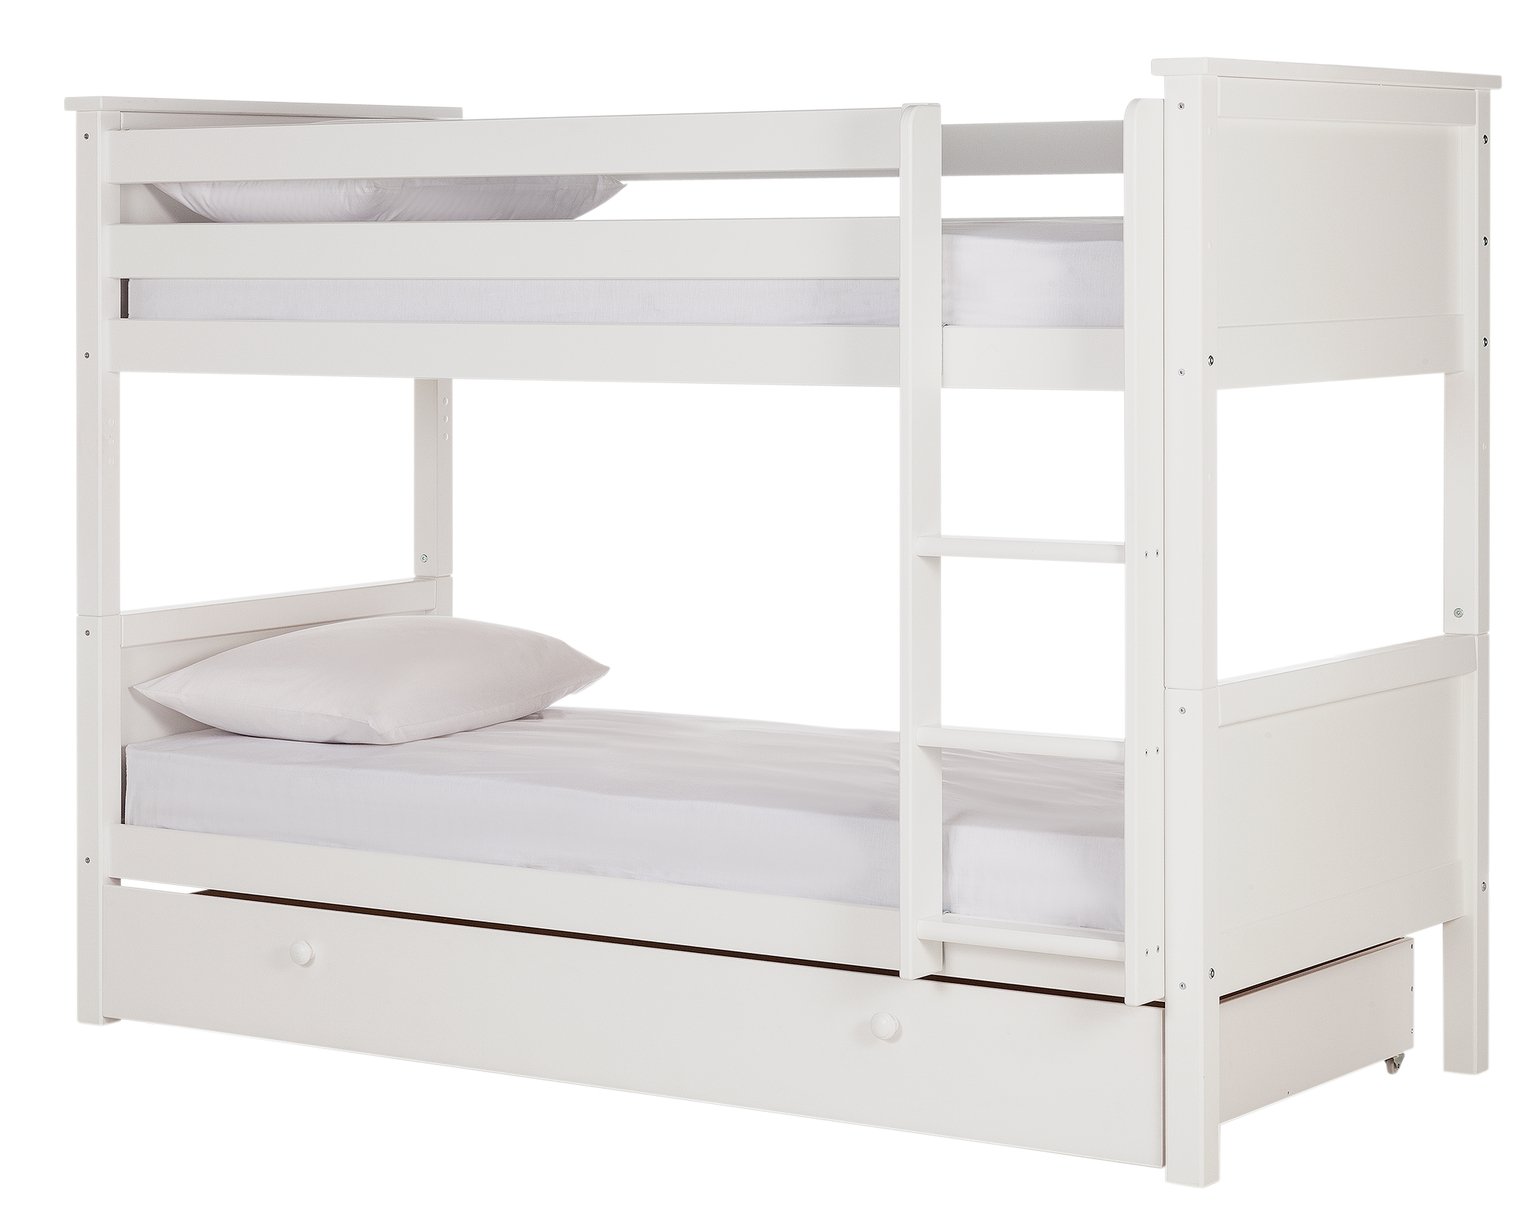 argos bunk beds with mattresses included